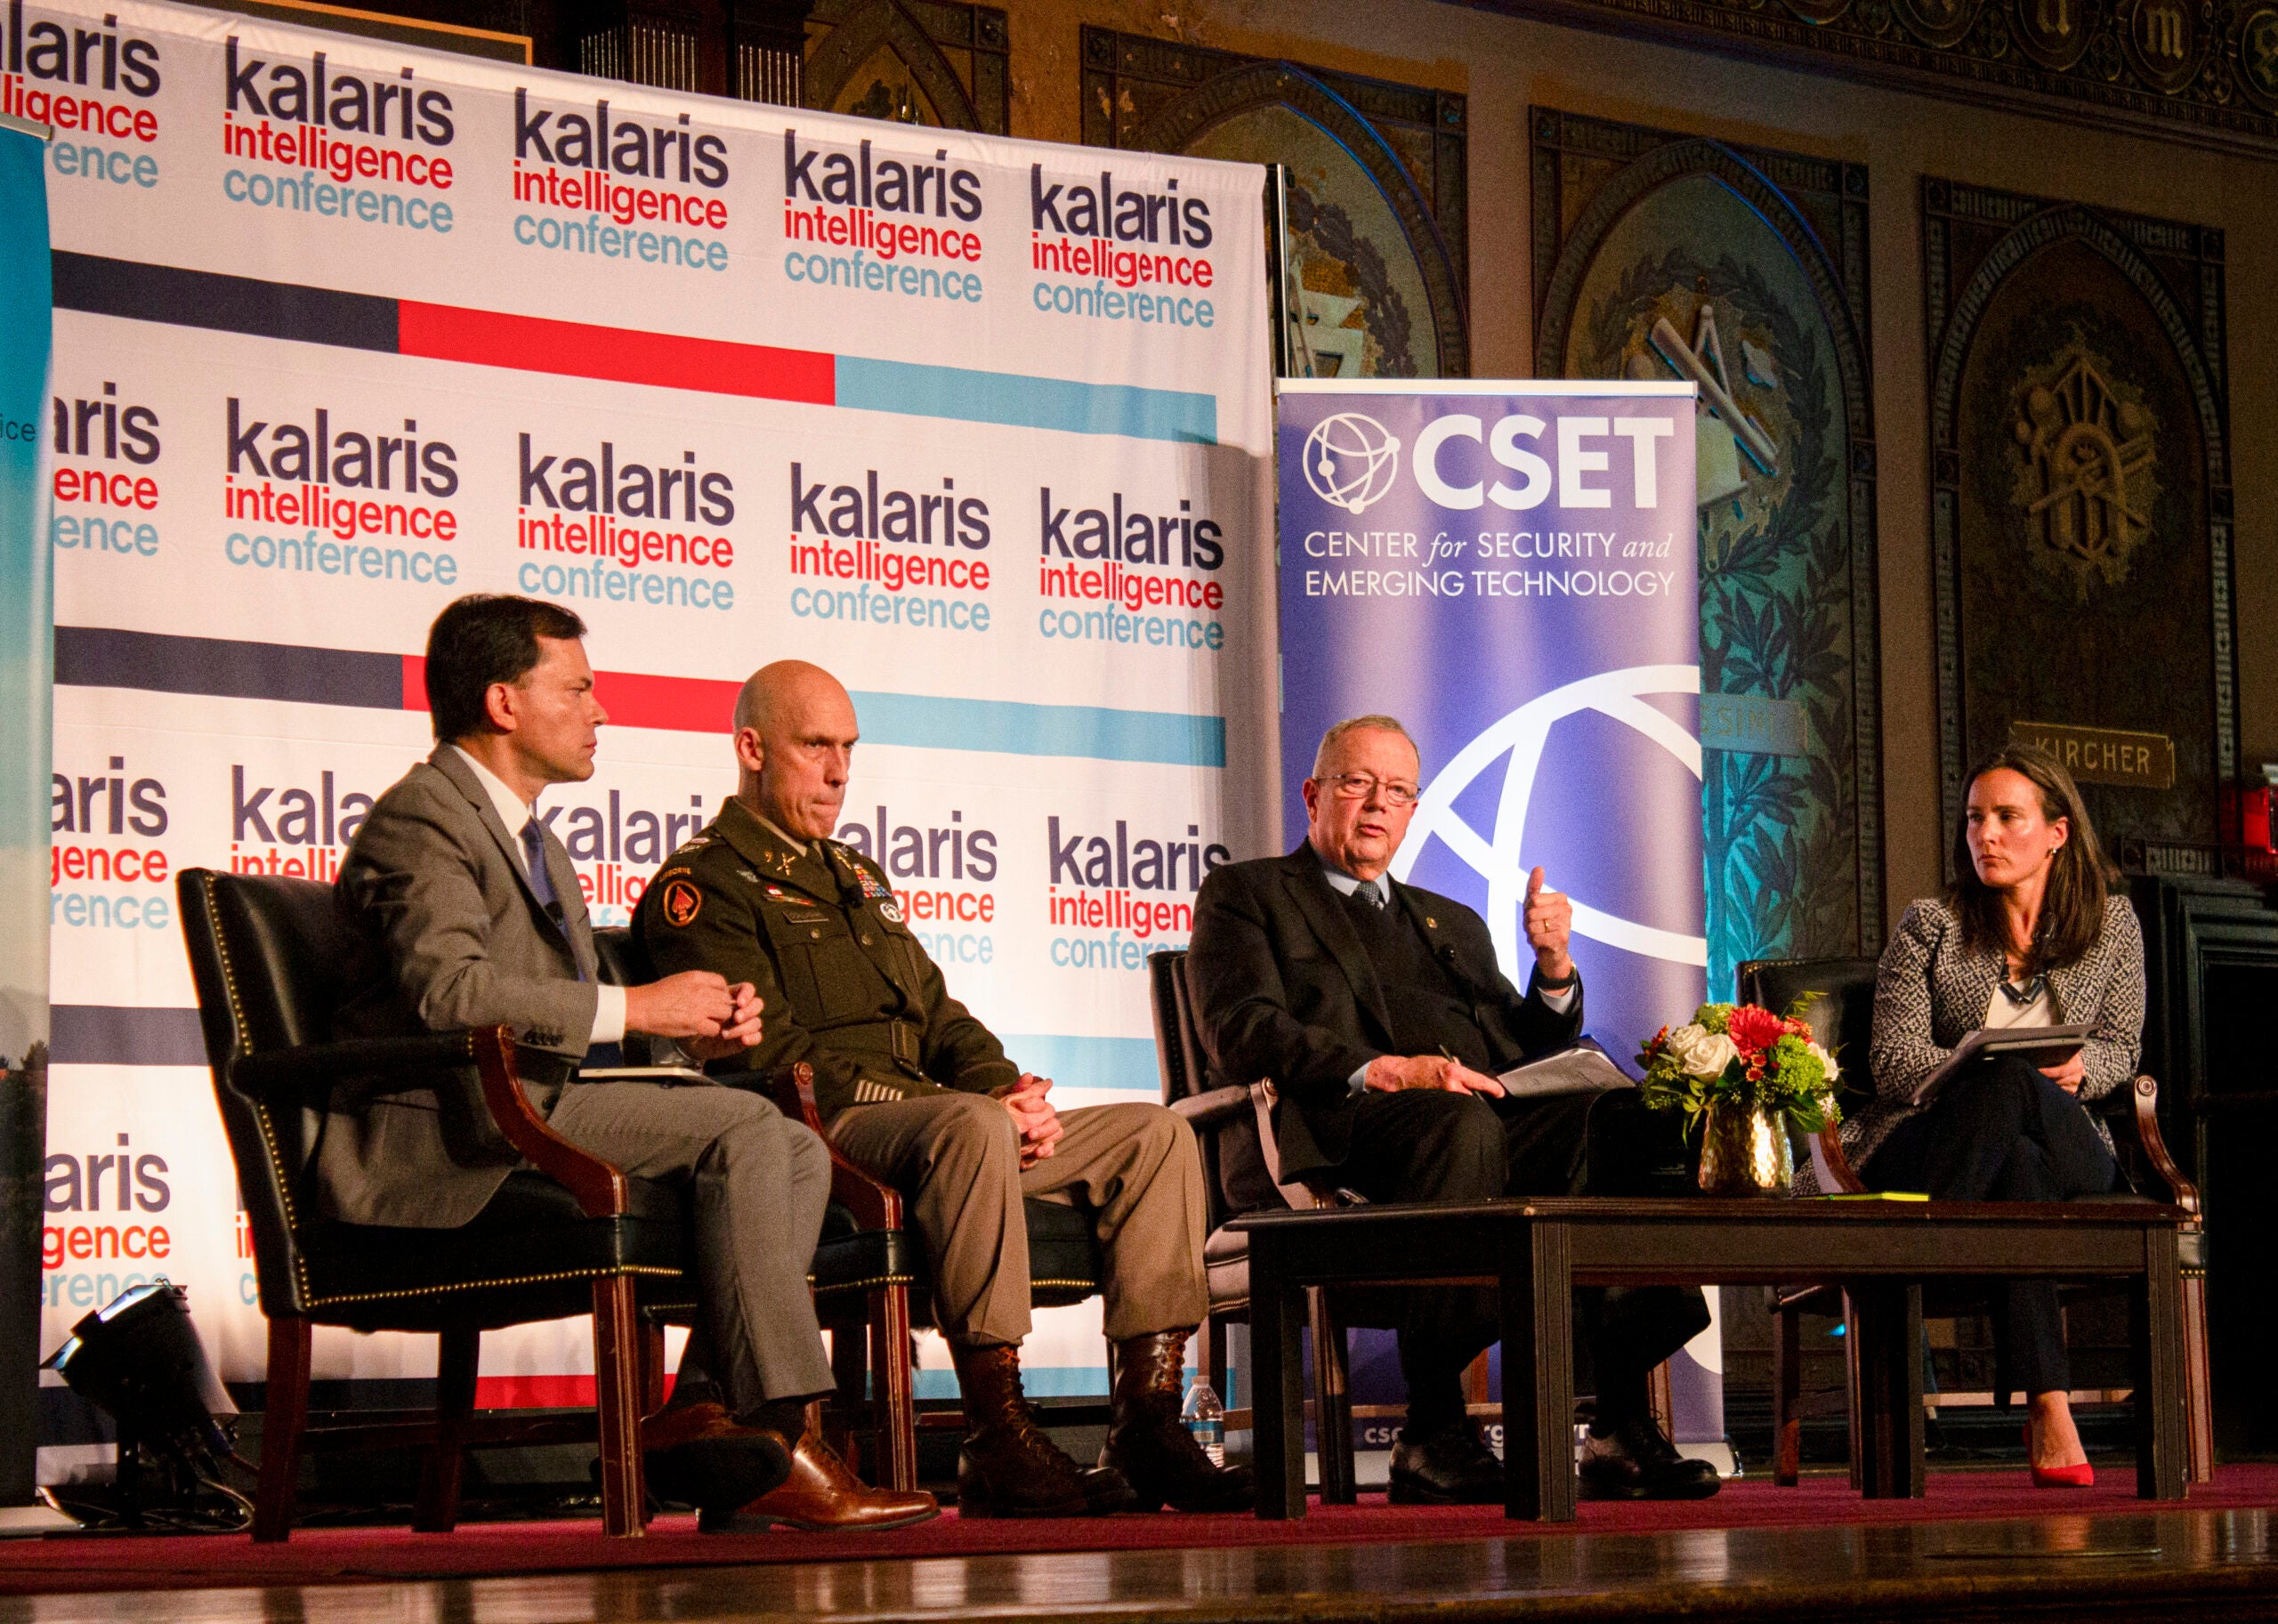 CSET's Emmy Probasco and company at the Kalaris Conference.